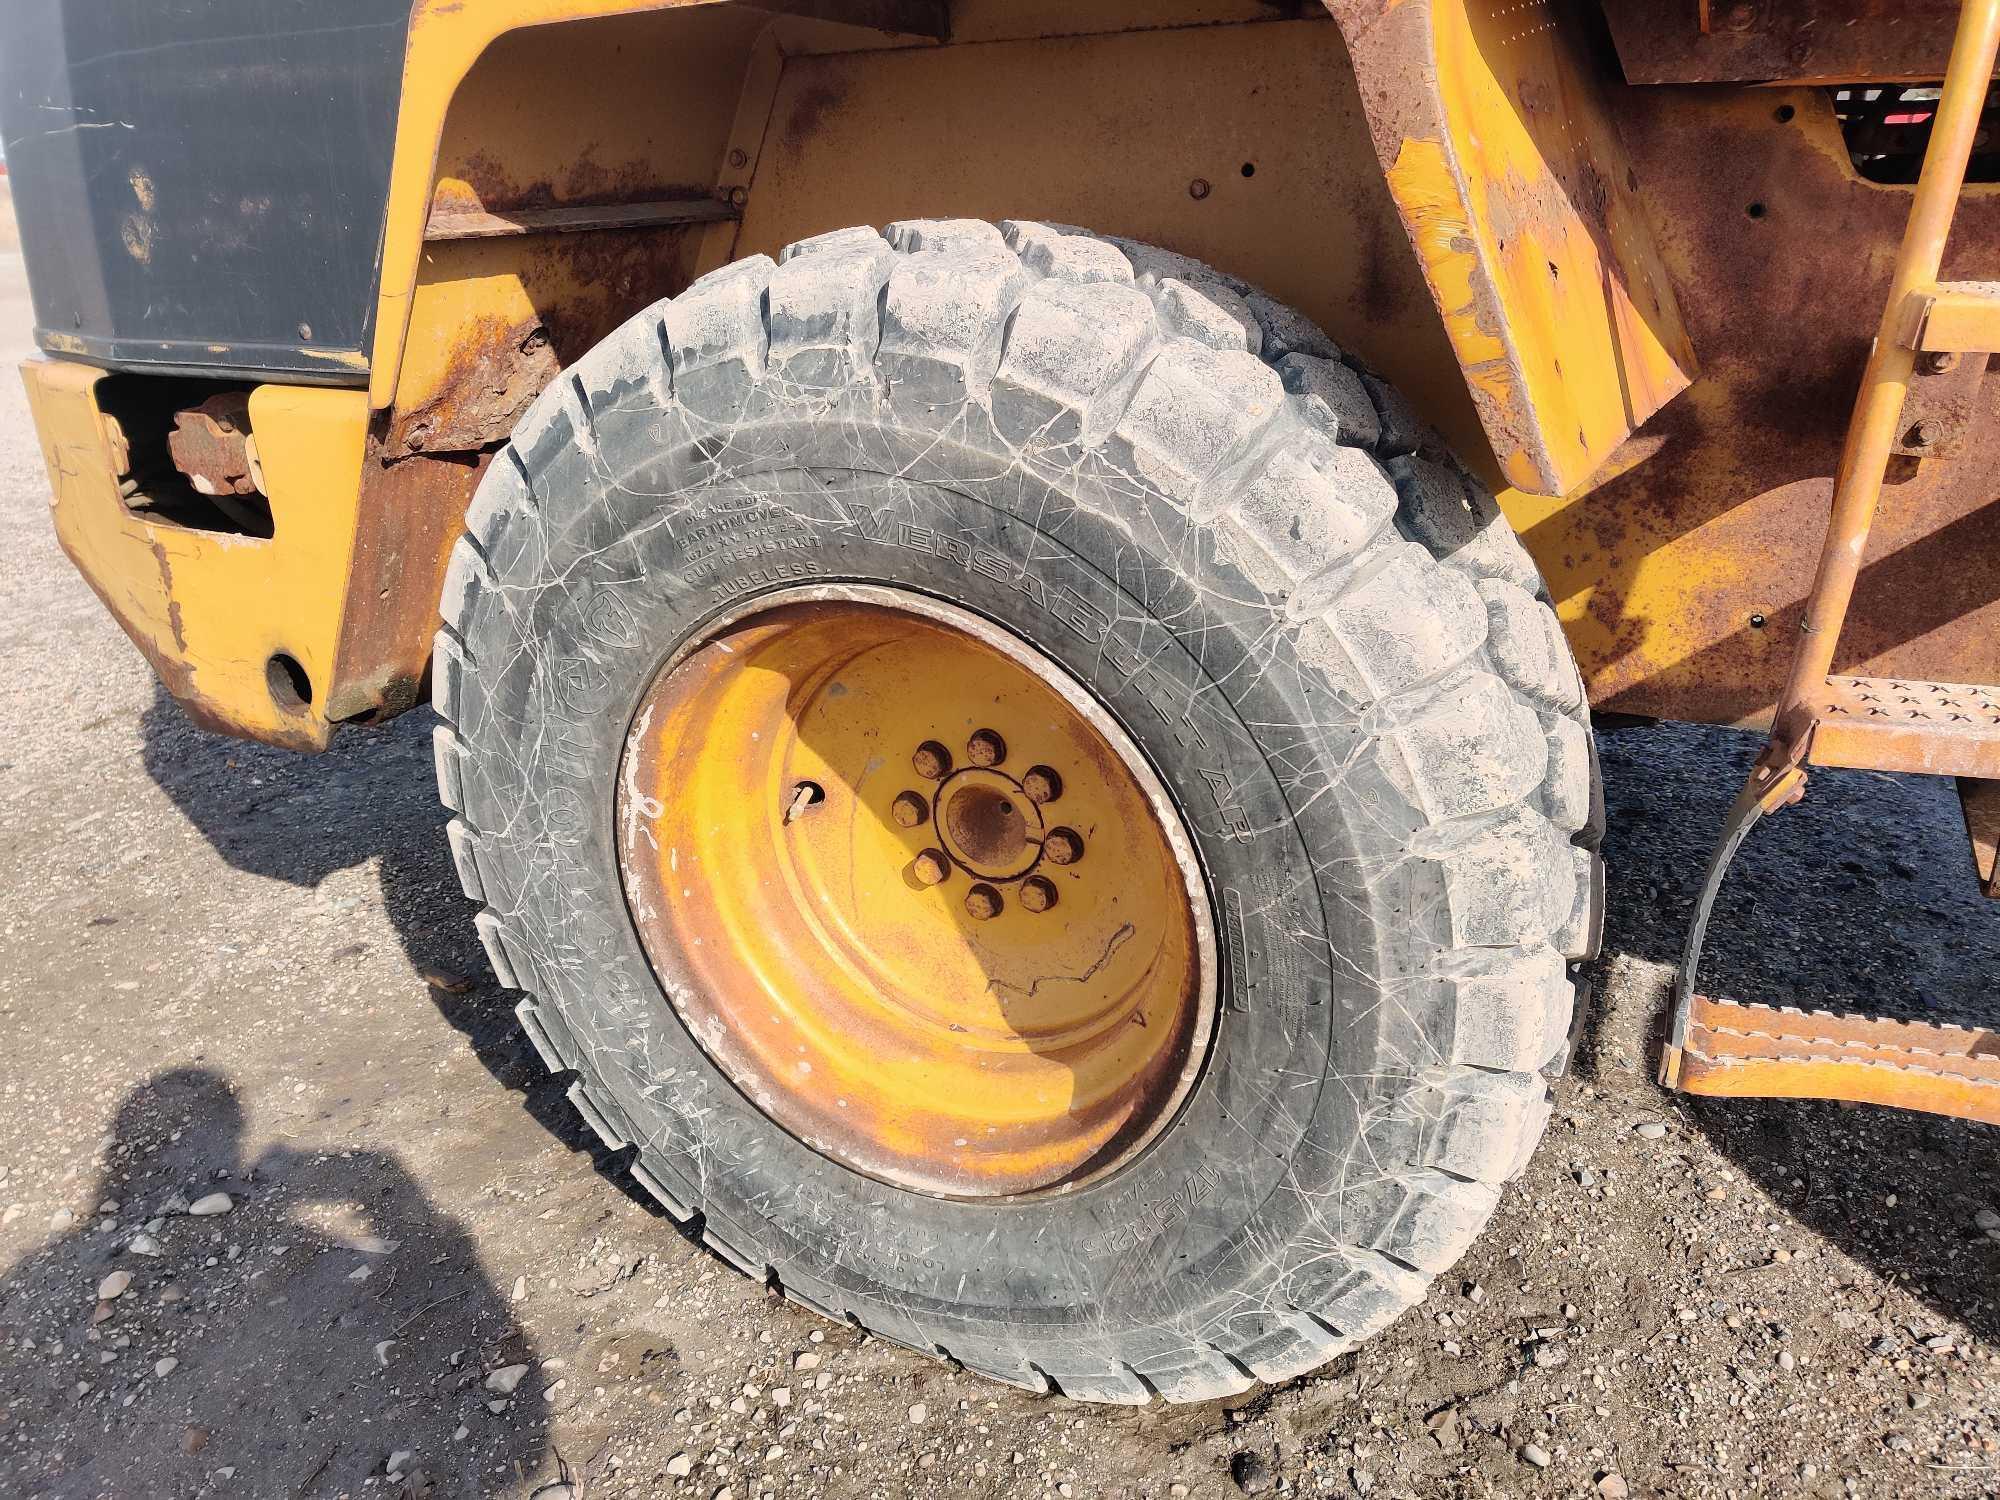 CAT 914G RUBBER TIRED LOADER SN:9WM01429 powered by Cat diesel engine, equipped with EROPS, heat, GP